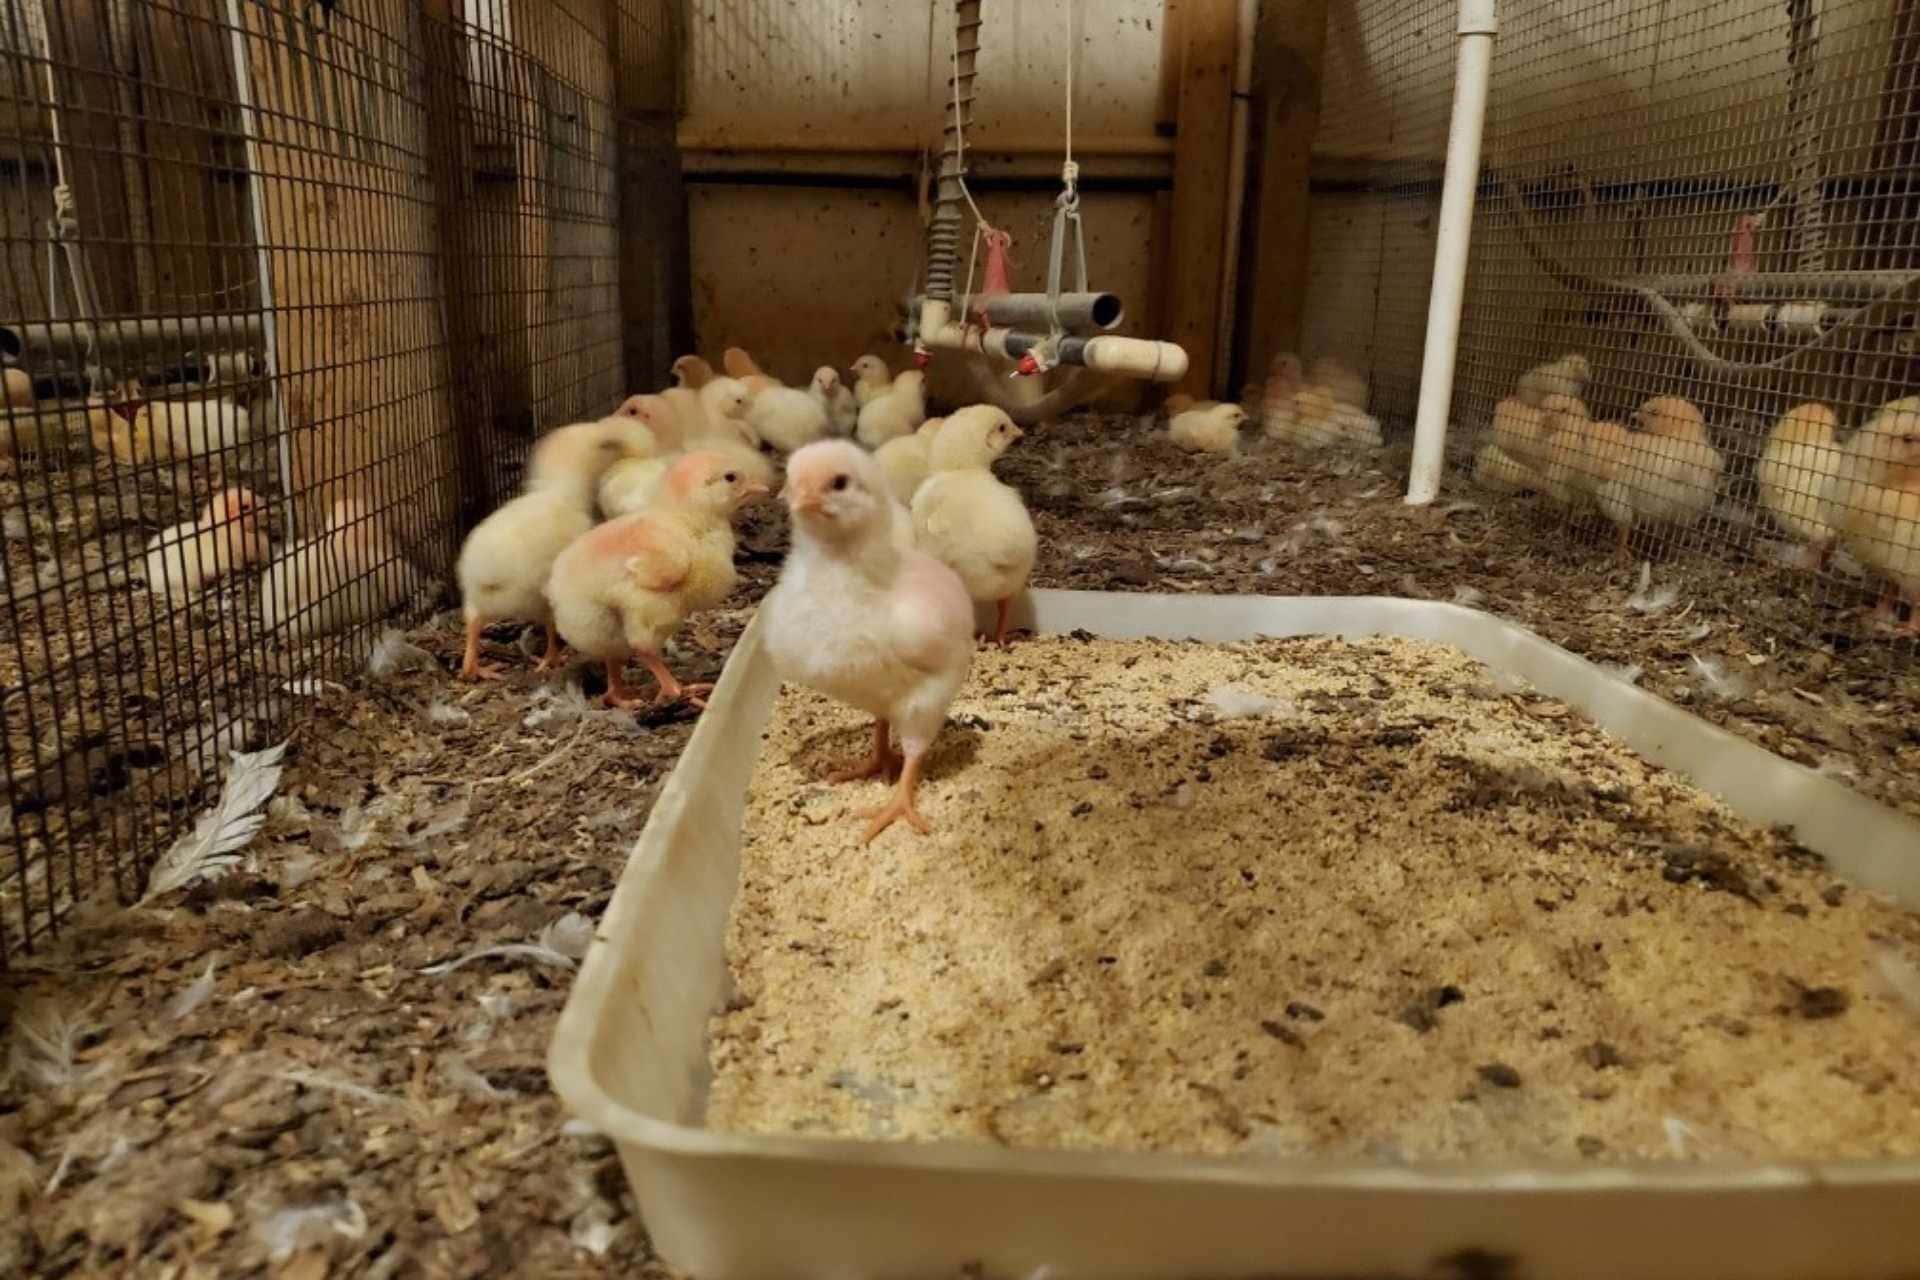 Broiler chicks are meat-type poultry that are fed diets that improve overall well-being, which may work synergistically with a wood-burning heat exchanger system, say WVU researchers. (Provided Photo)